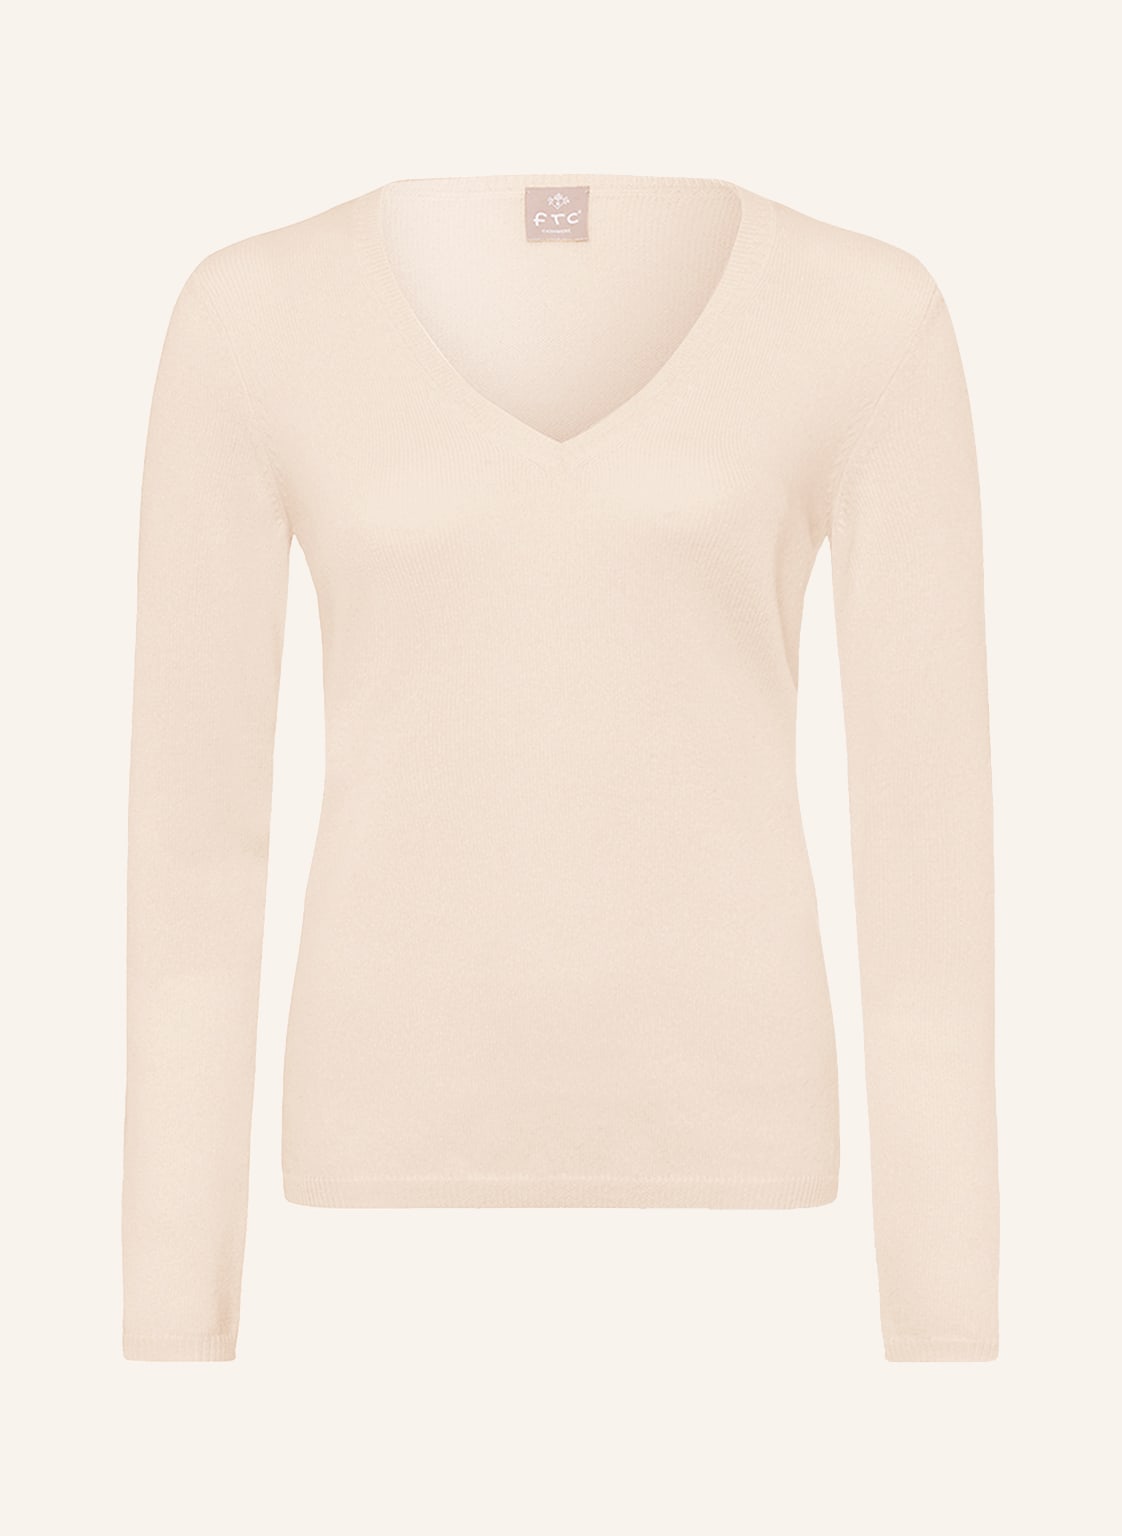 Image of Ftc Cashmere Cashmere-Pullover beige